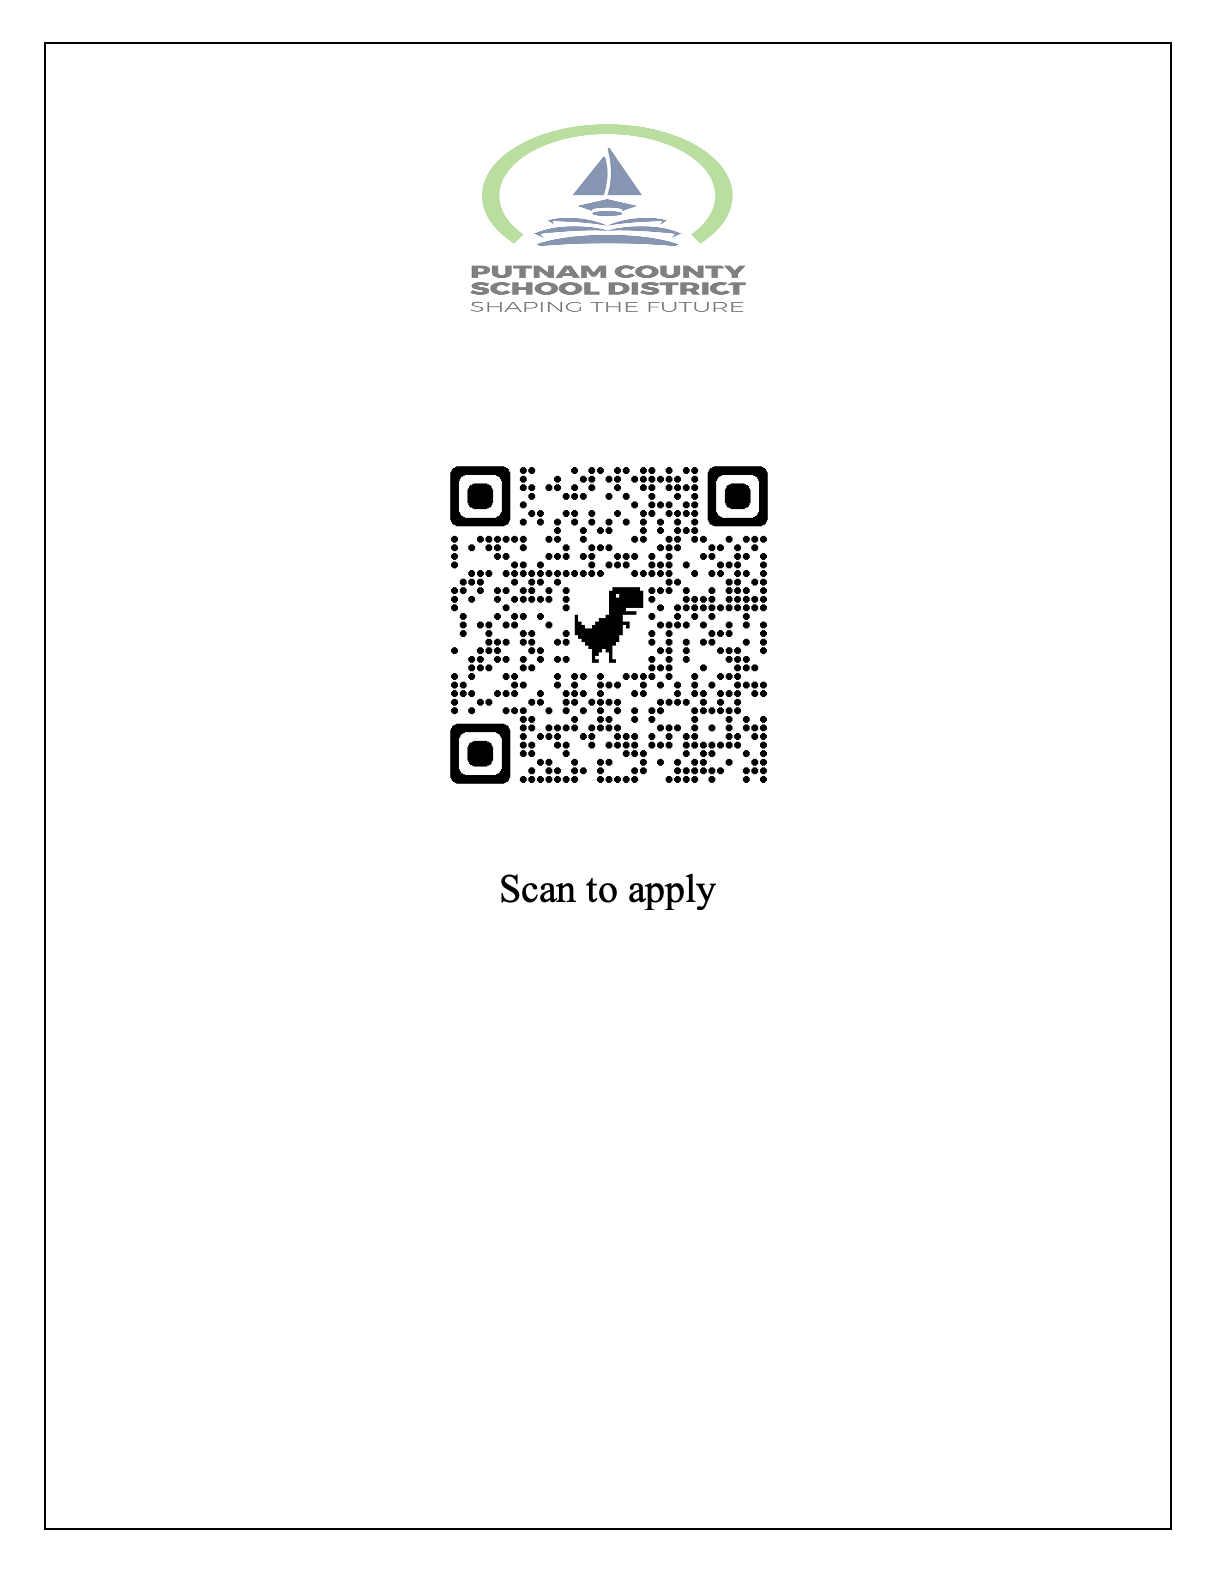 Putnam County School District - Scan to Apply